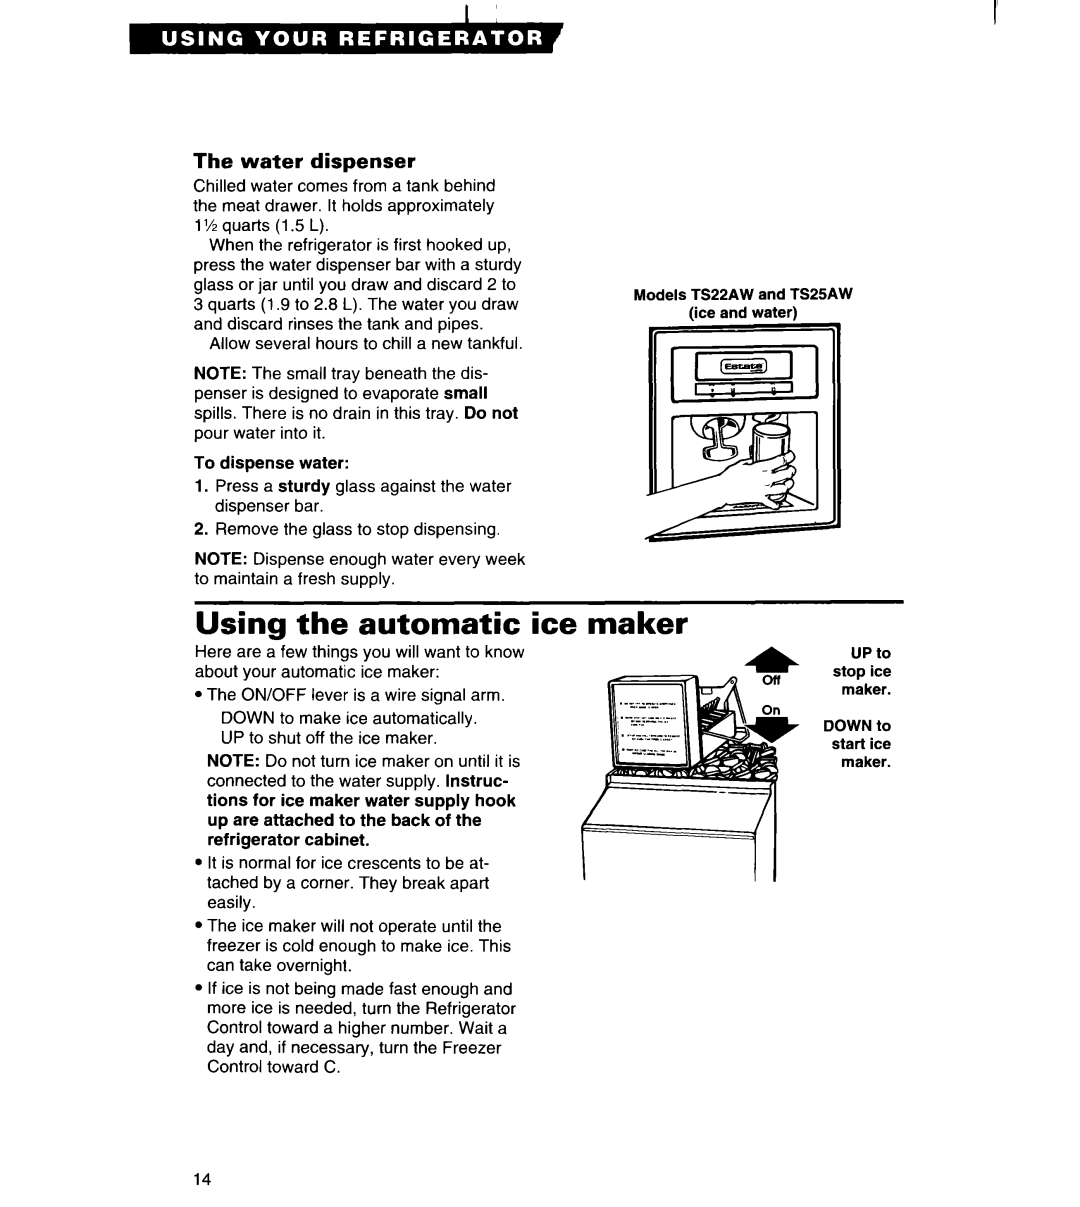 Whirlpool TS22AW important safety instructions Using the automatic ice maker, The water dispenser 